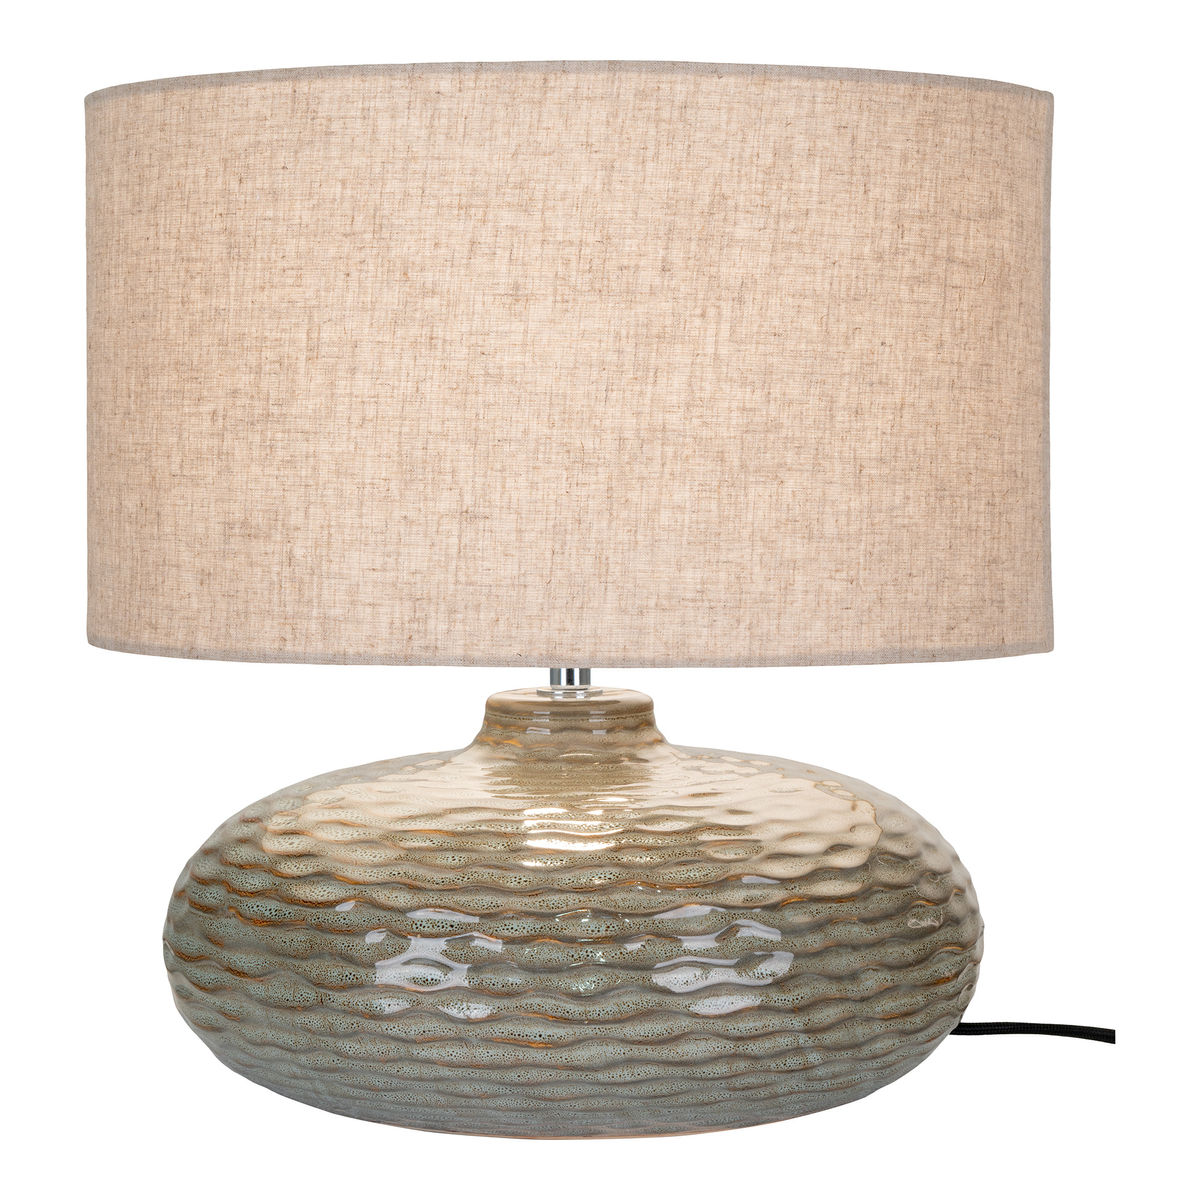 House Nordic Oldham table lamp